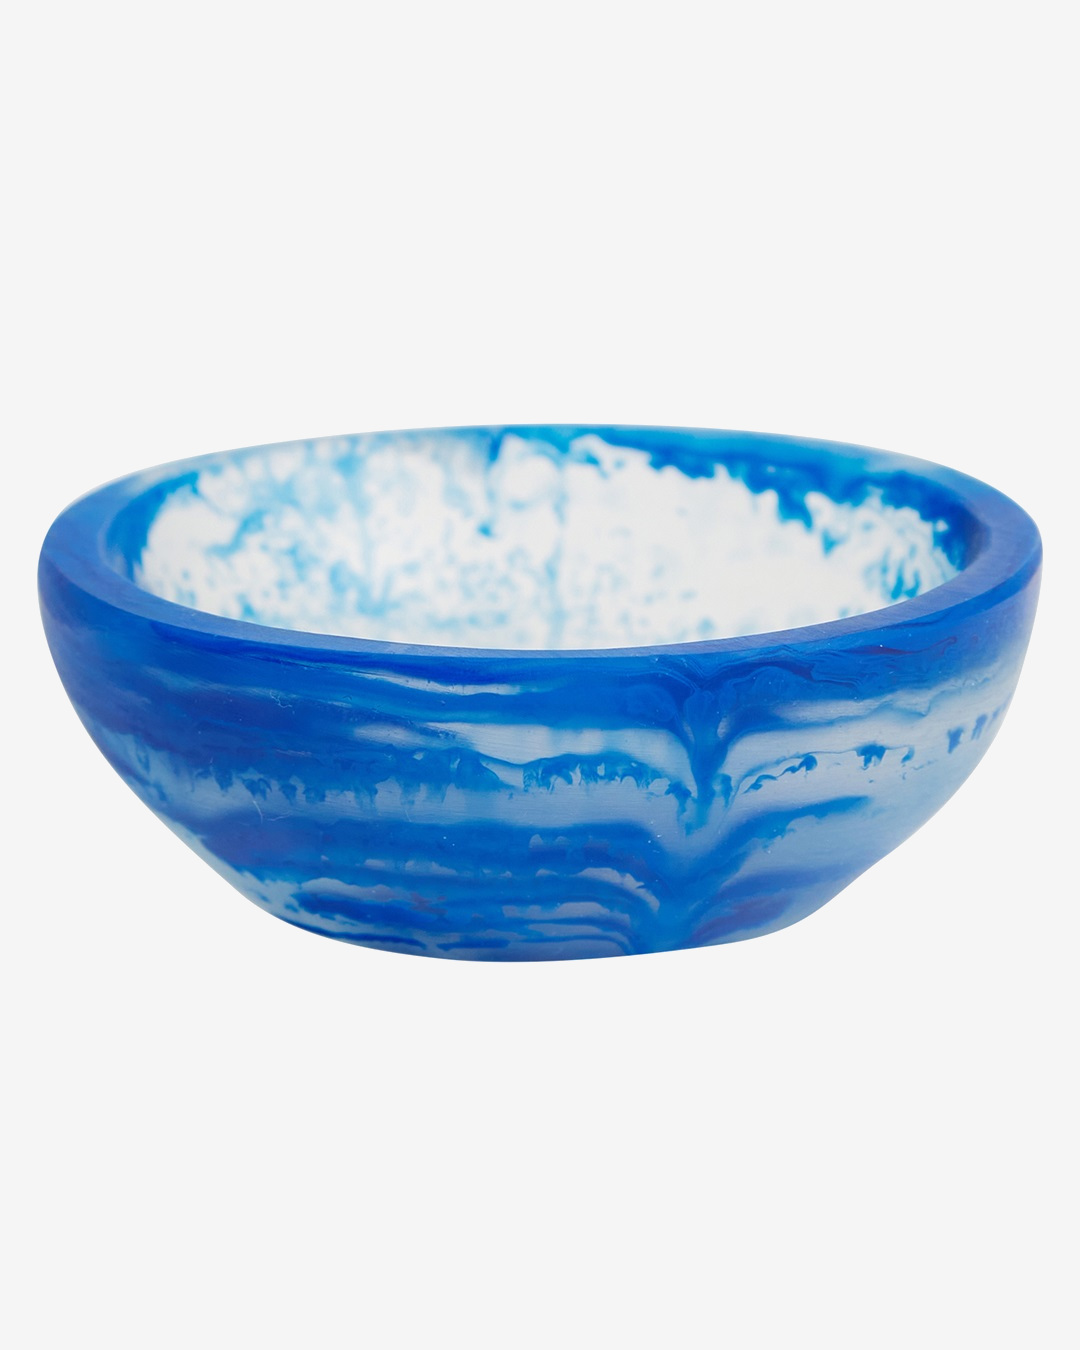 Blue round bowl with salt in it